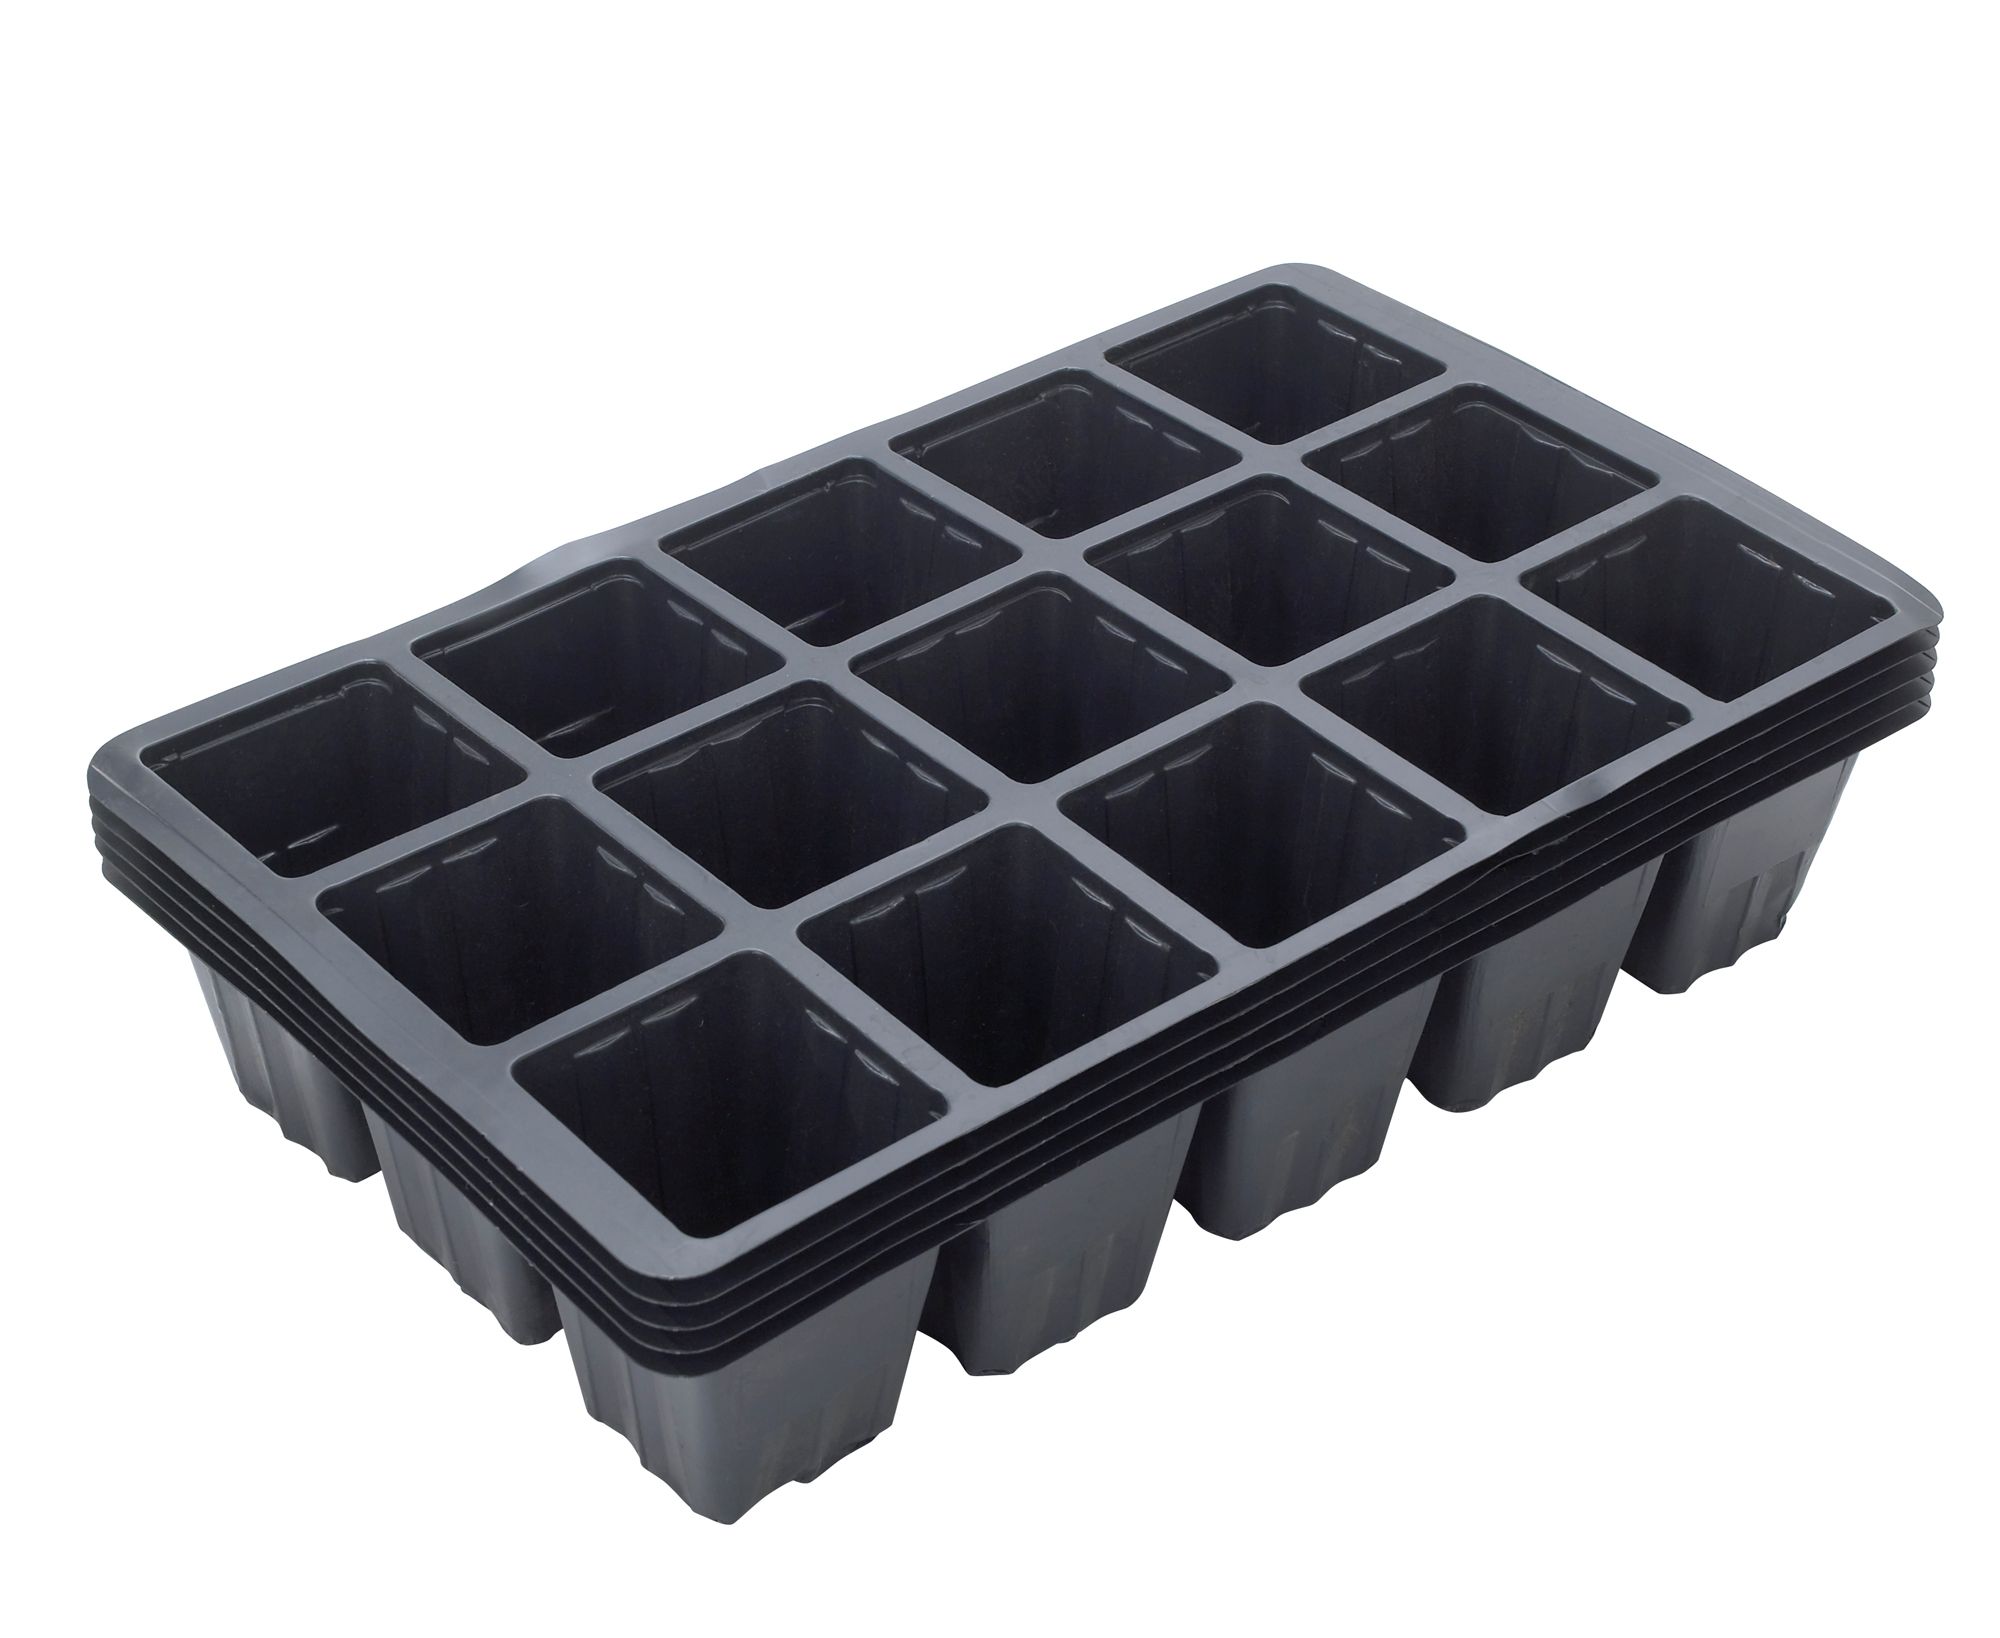 B&Q Black Plastic 15 Seed Tray, Pack of 5 | Trays and Gardens